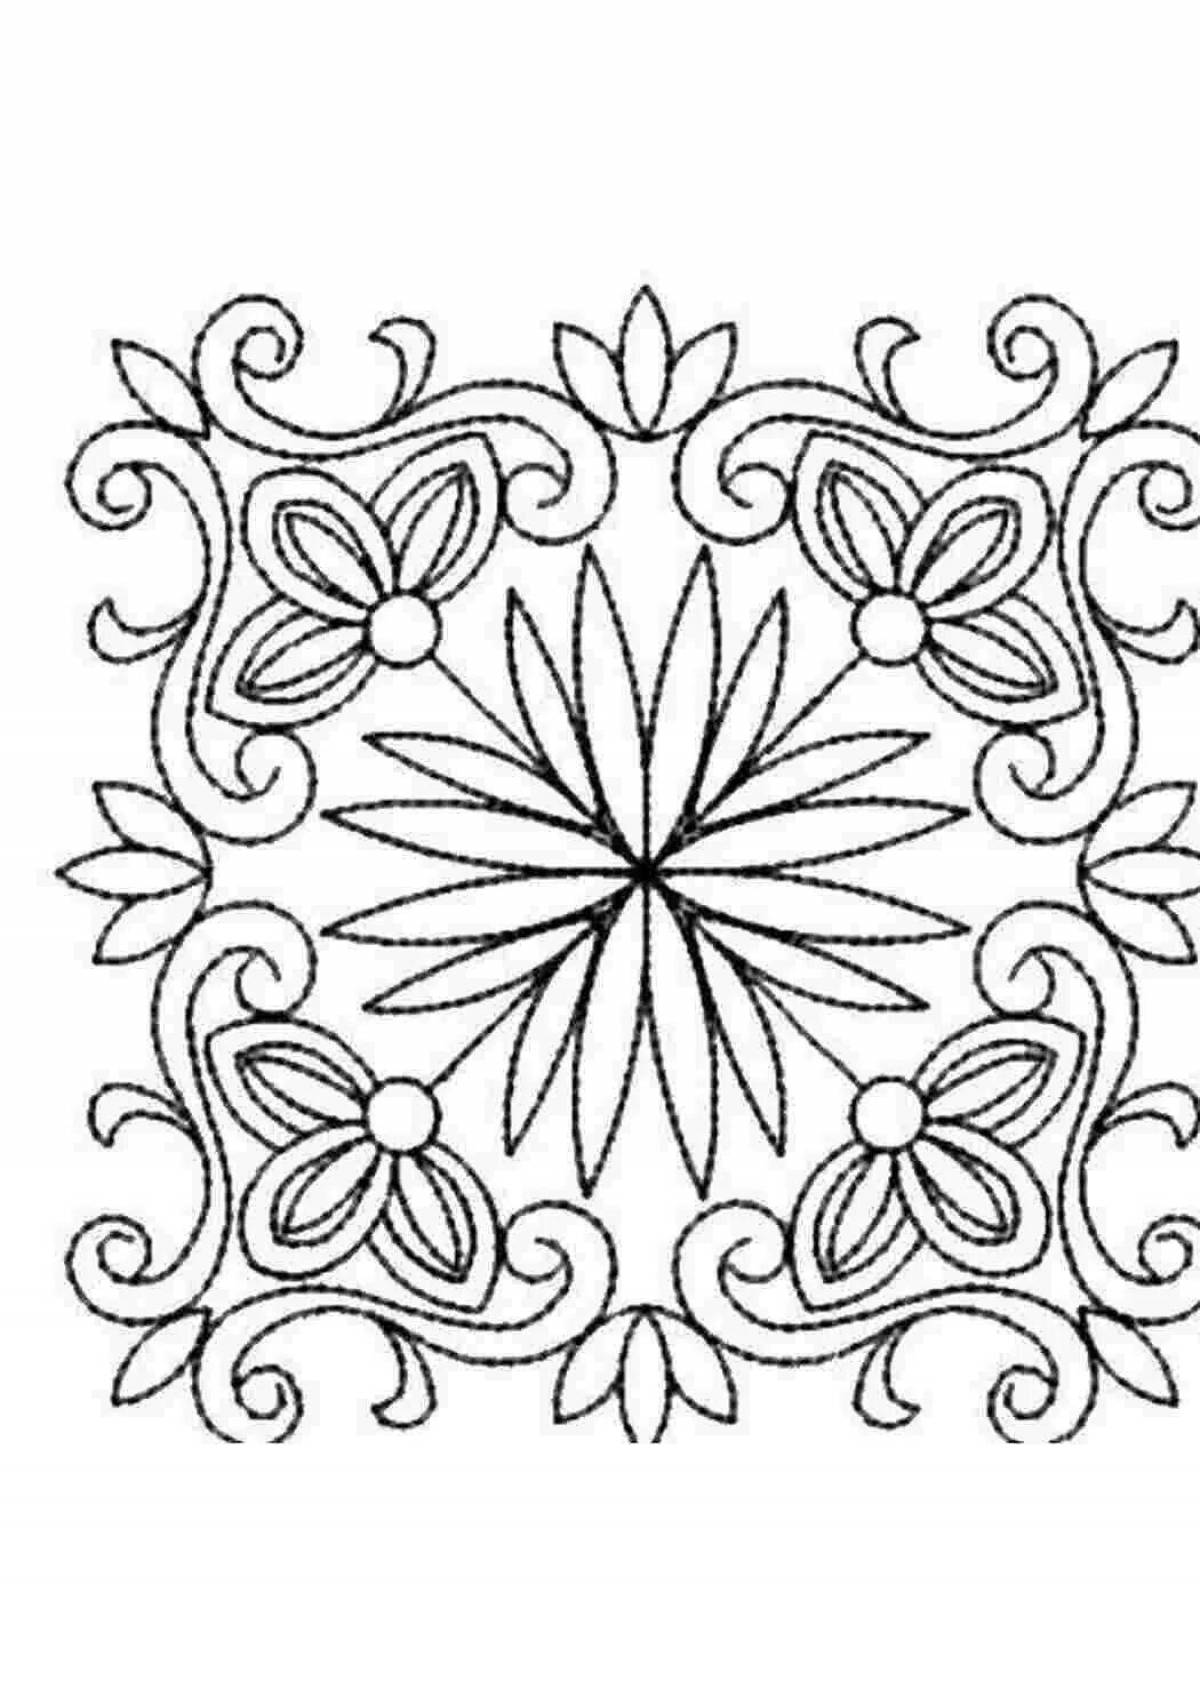 Adorable pavlovian scarf coloring book for kids